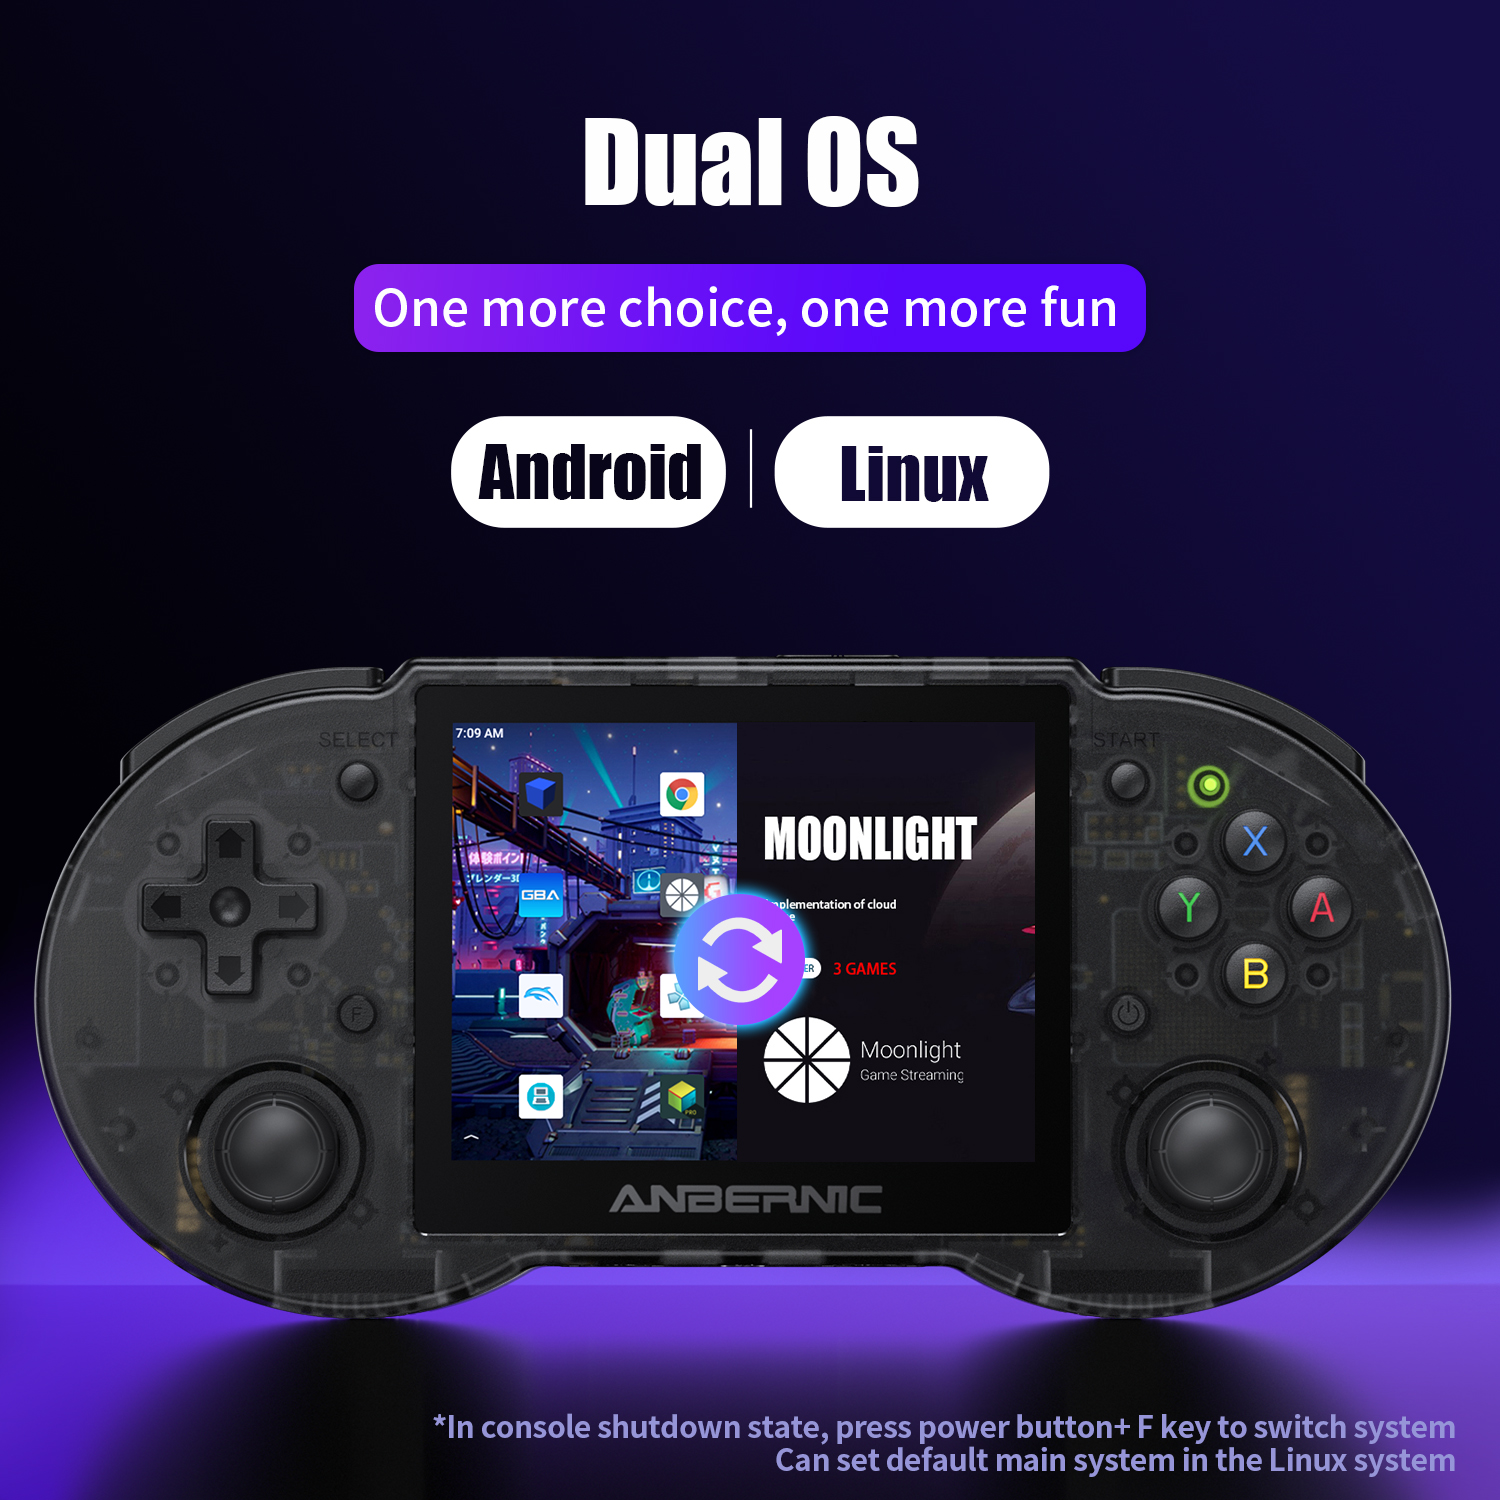 ANBERNIC RG353P 272GB 35000 Games Video Handheld Game Console Android 11 Linux Dual System 5G WiFi Bluetooth 4.2 DC SS PS1 NDS N64 Retro Game Player 3.5 inch IPS Full View Display HDMI Output